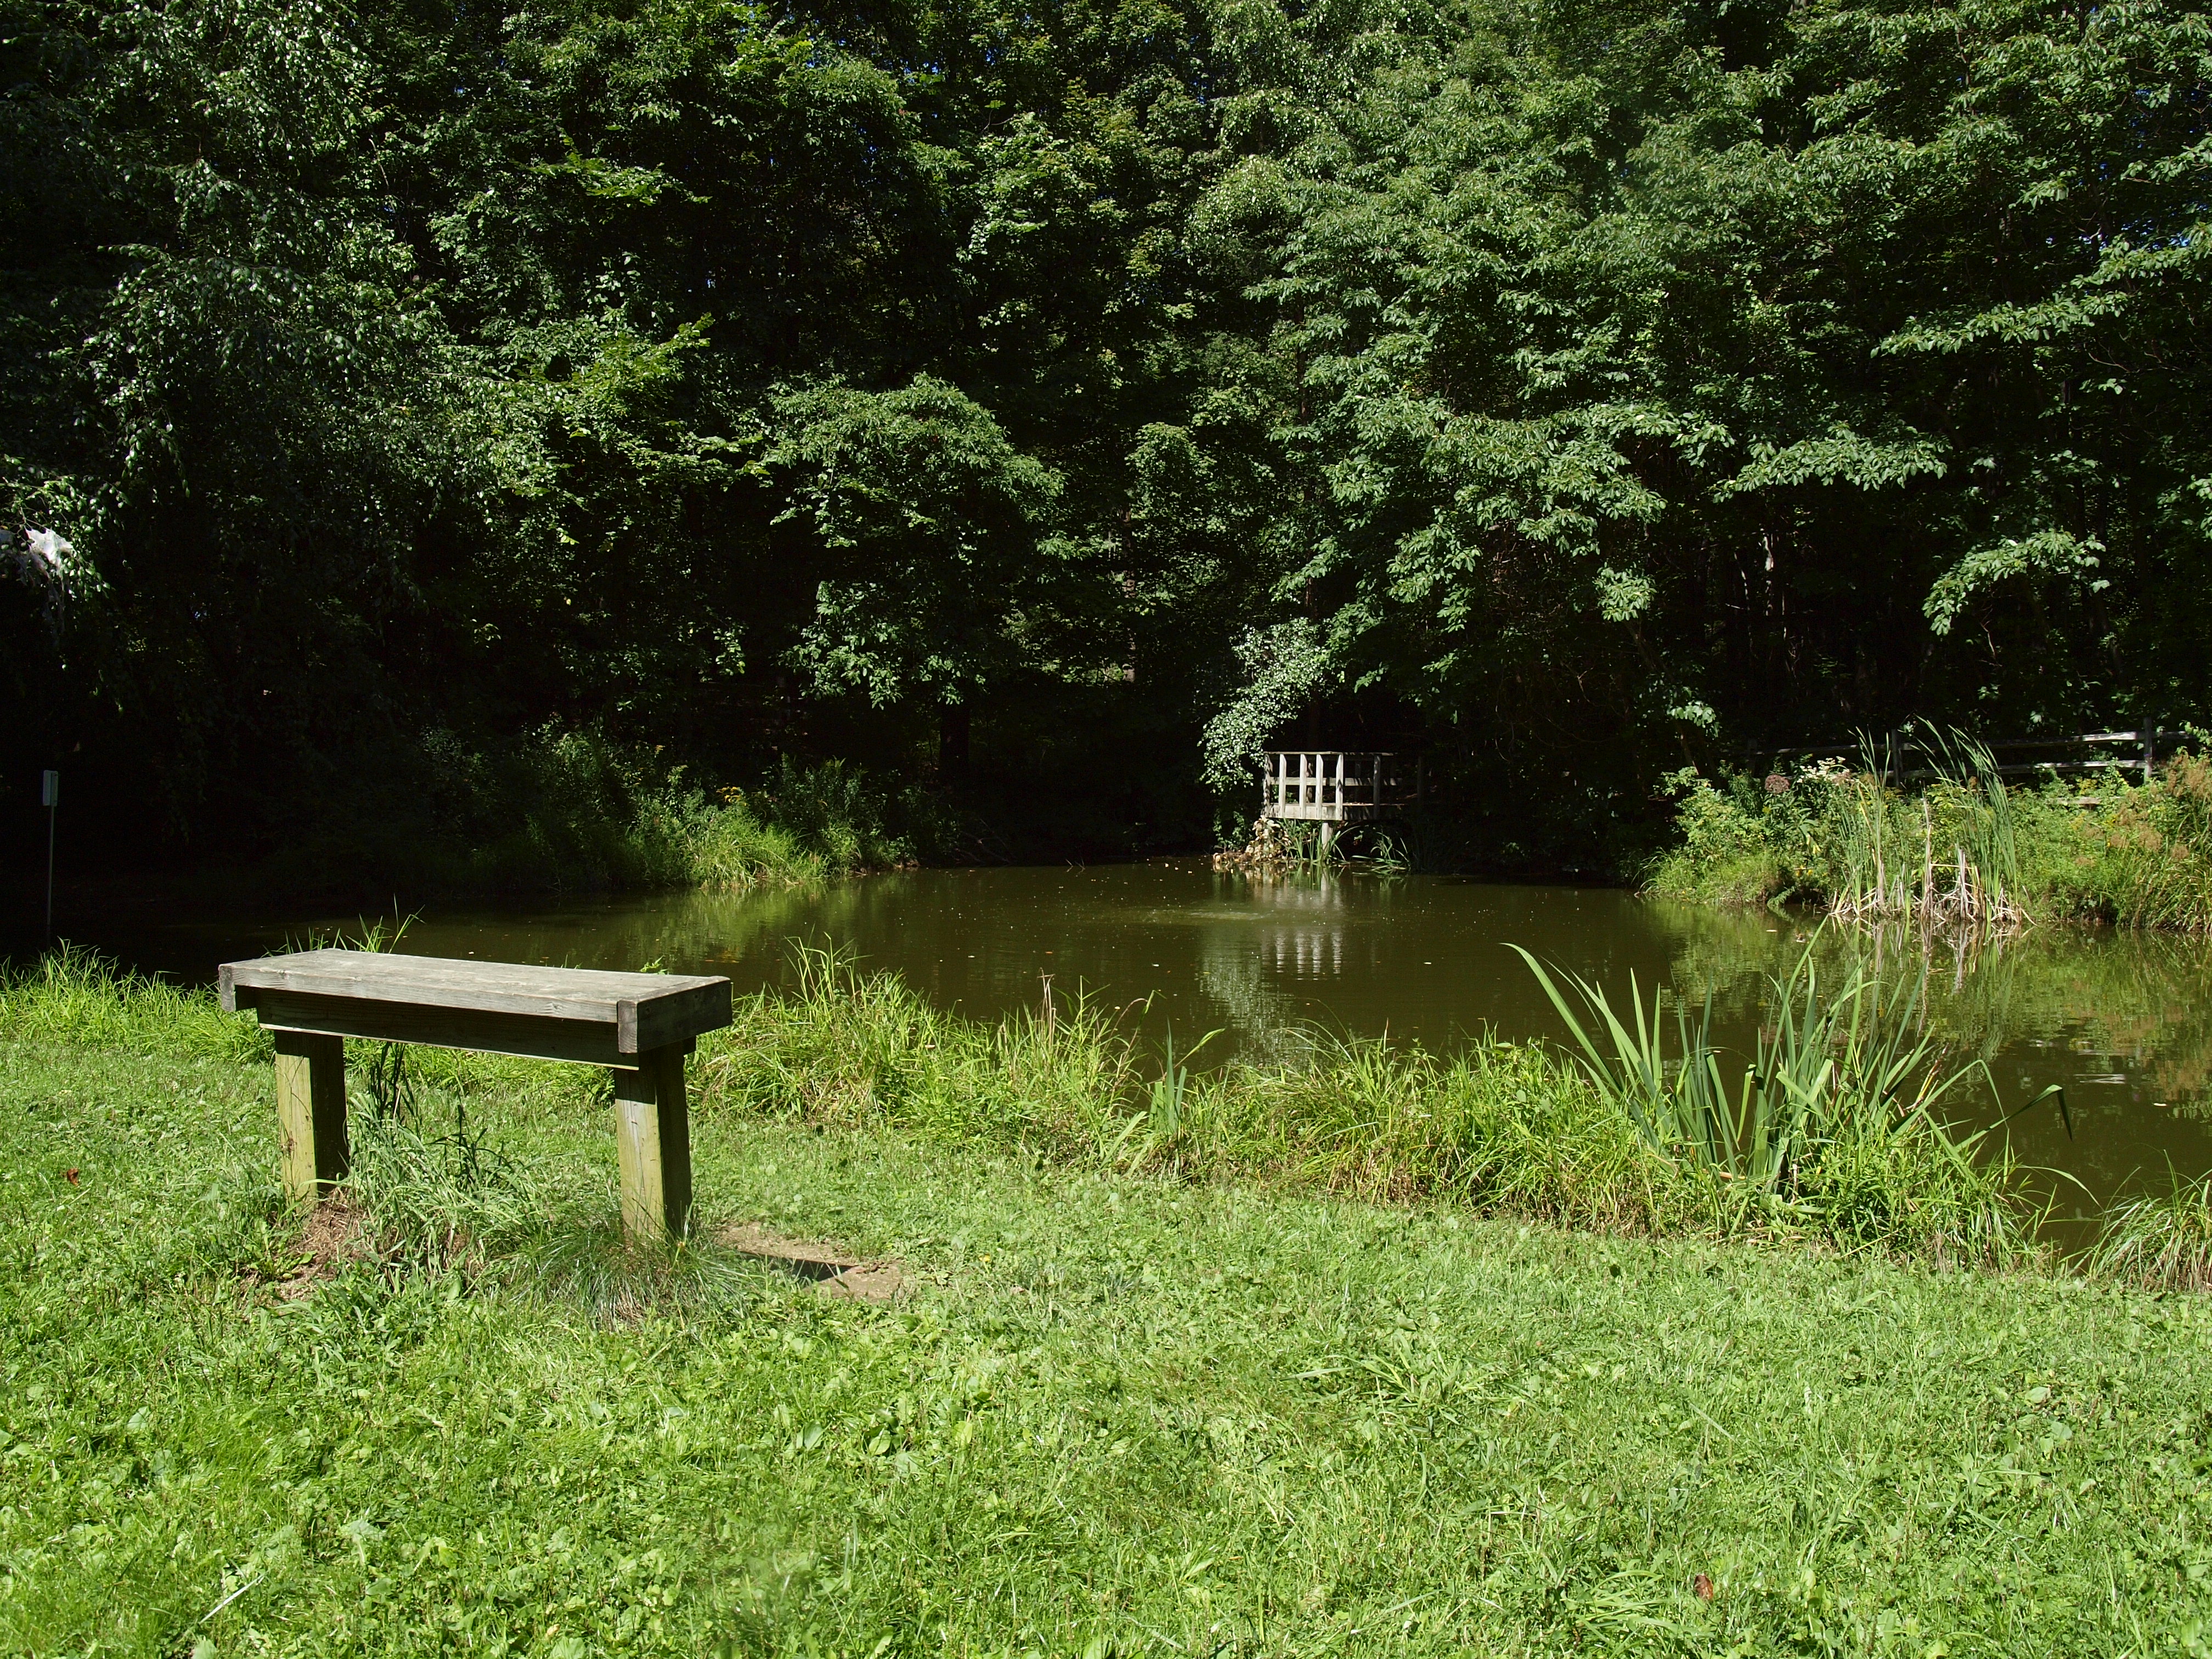 A bench in the grass overlooks a pond on the Nature Center property